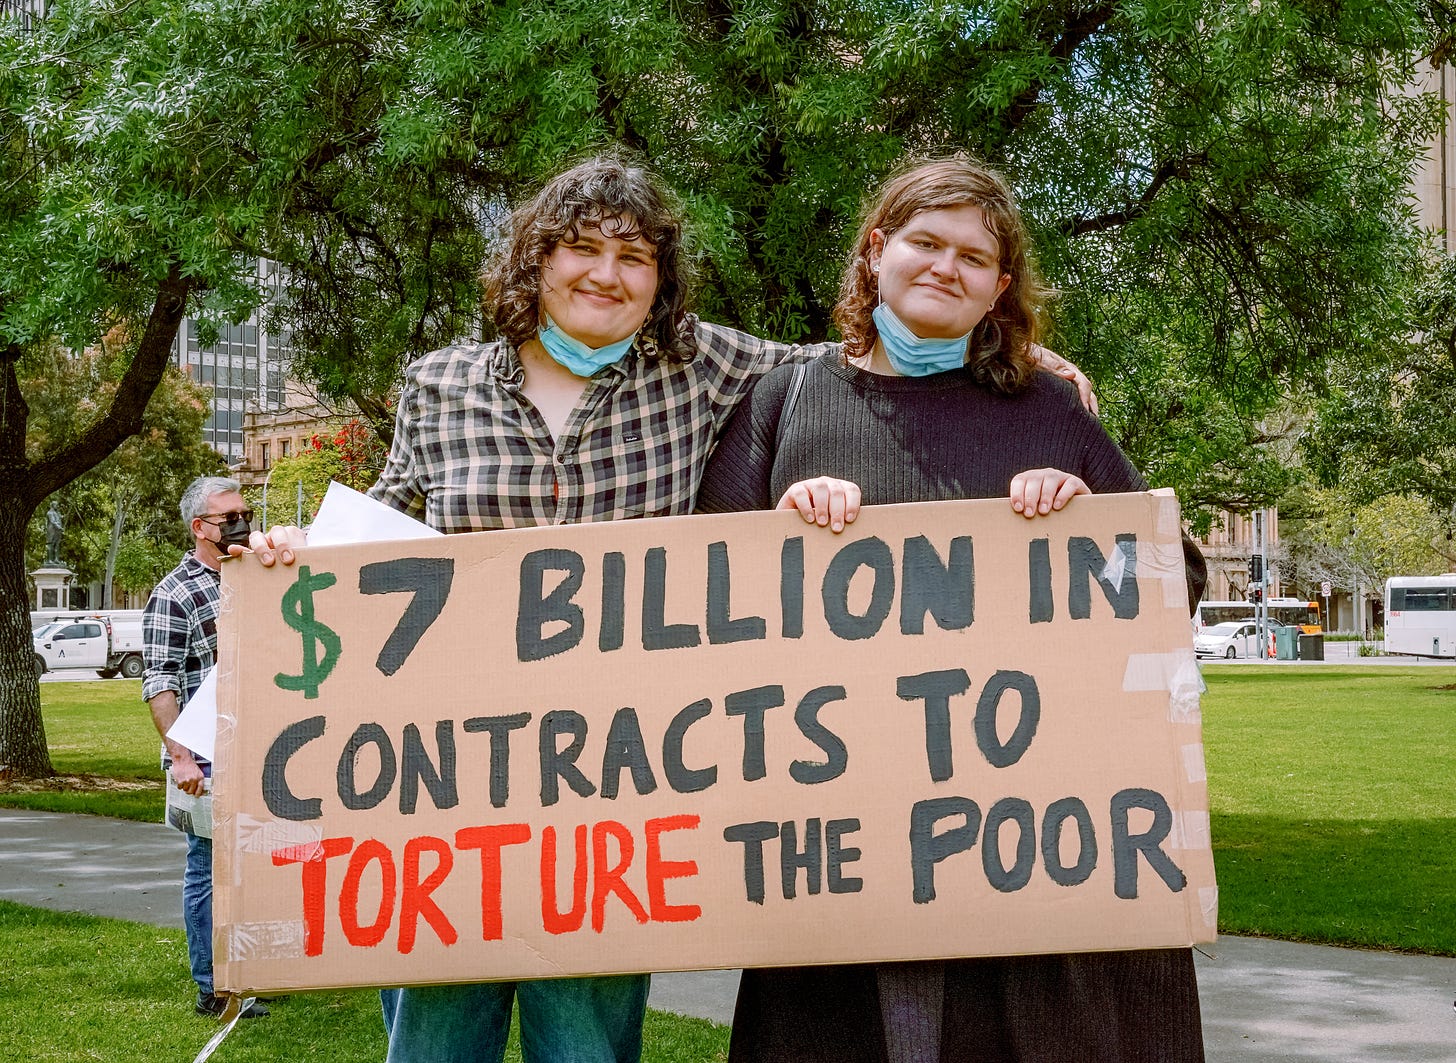 Two people holding a sign in front of a tree. The sign says "$7 billion in contracts to torture the poor"